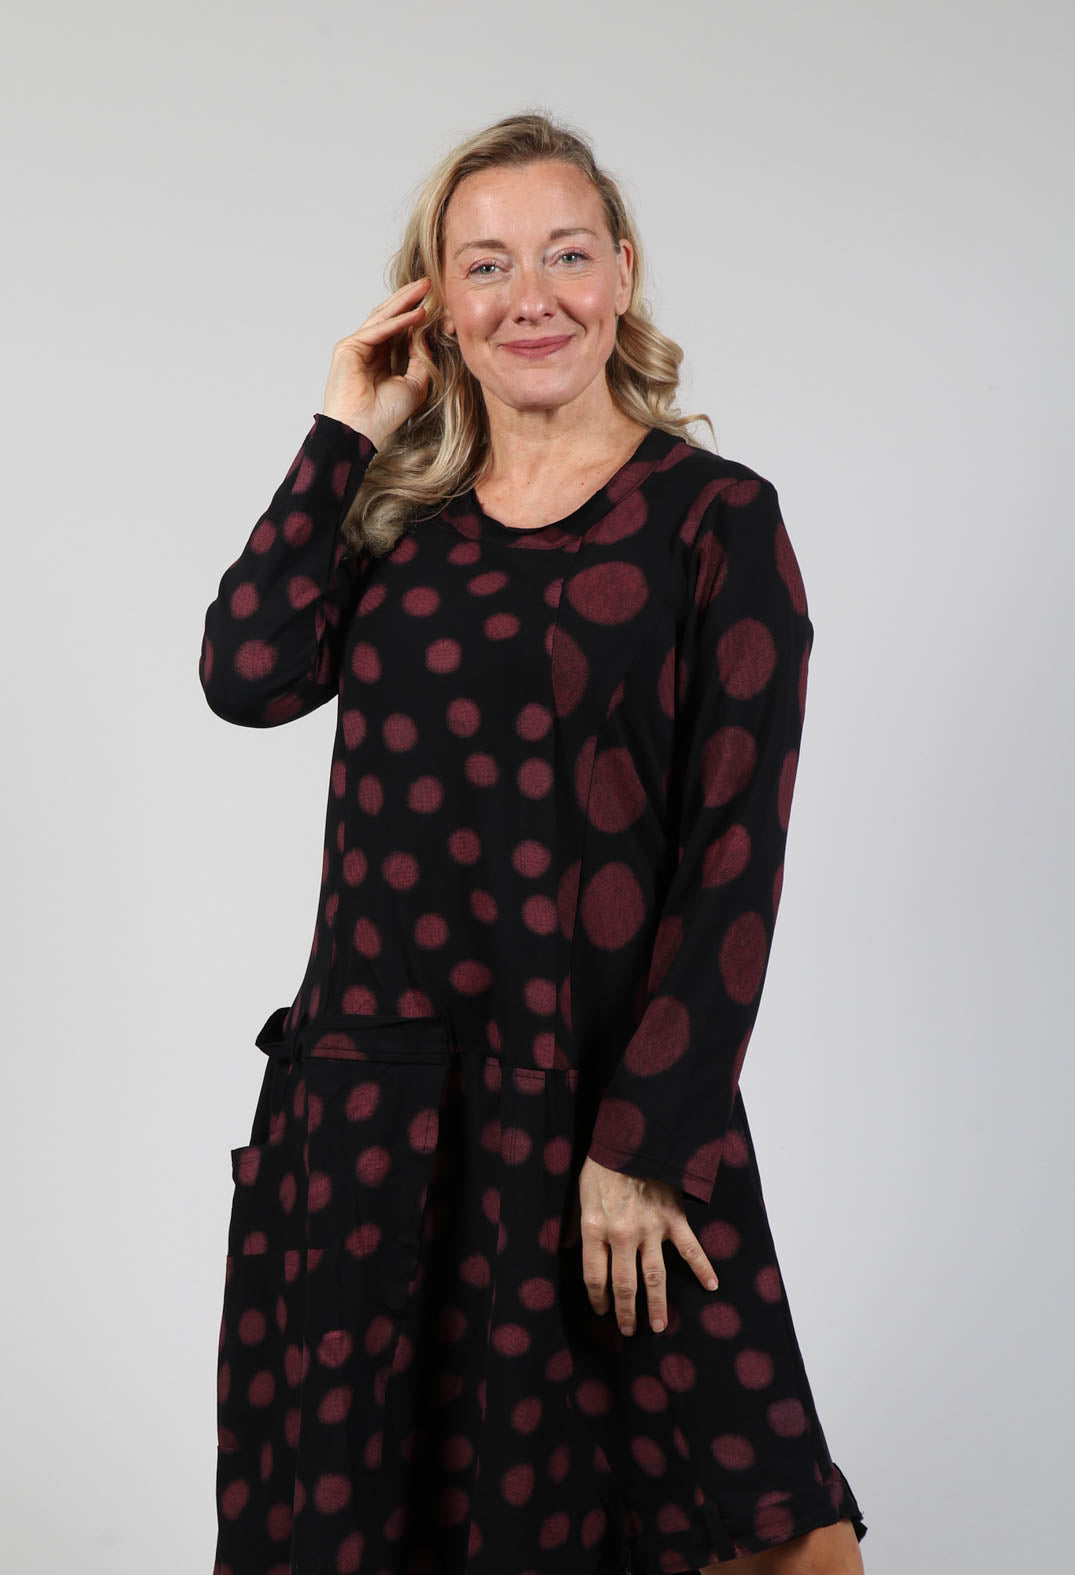 Smock Dress in Red Pois